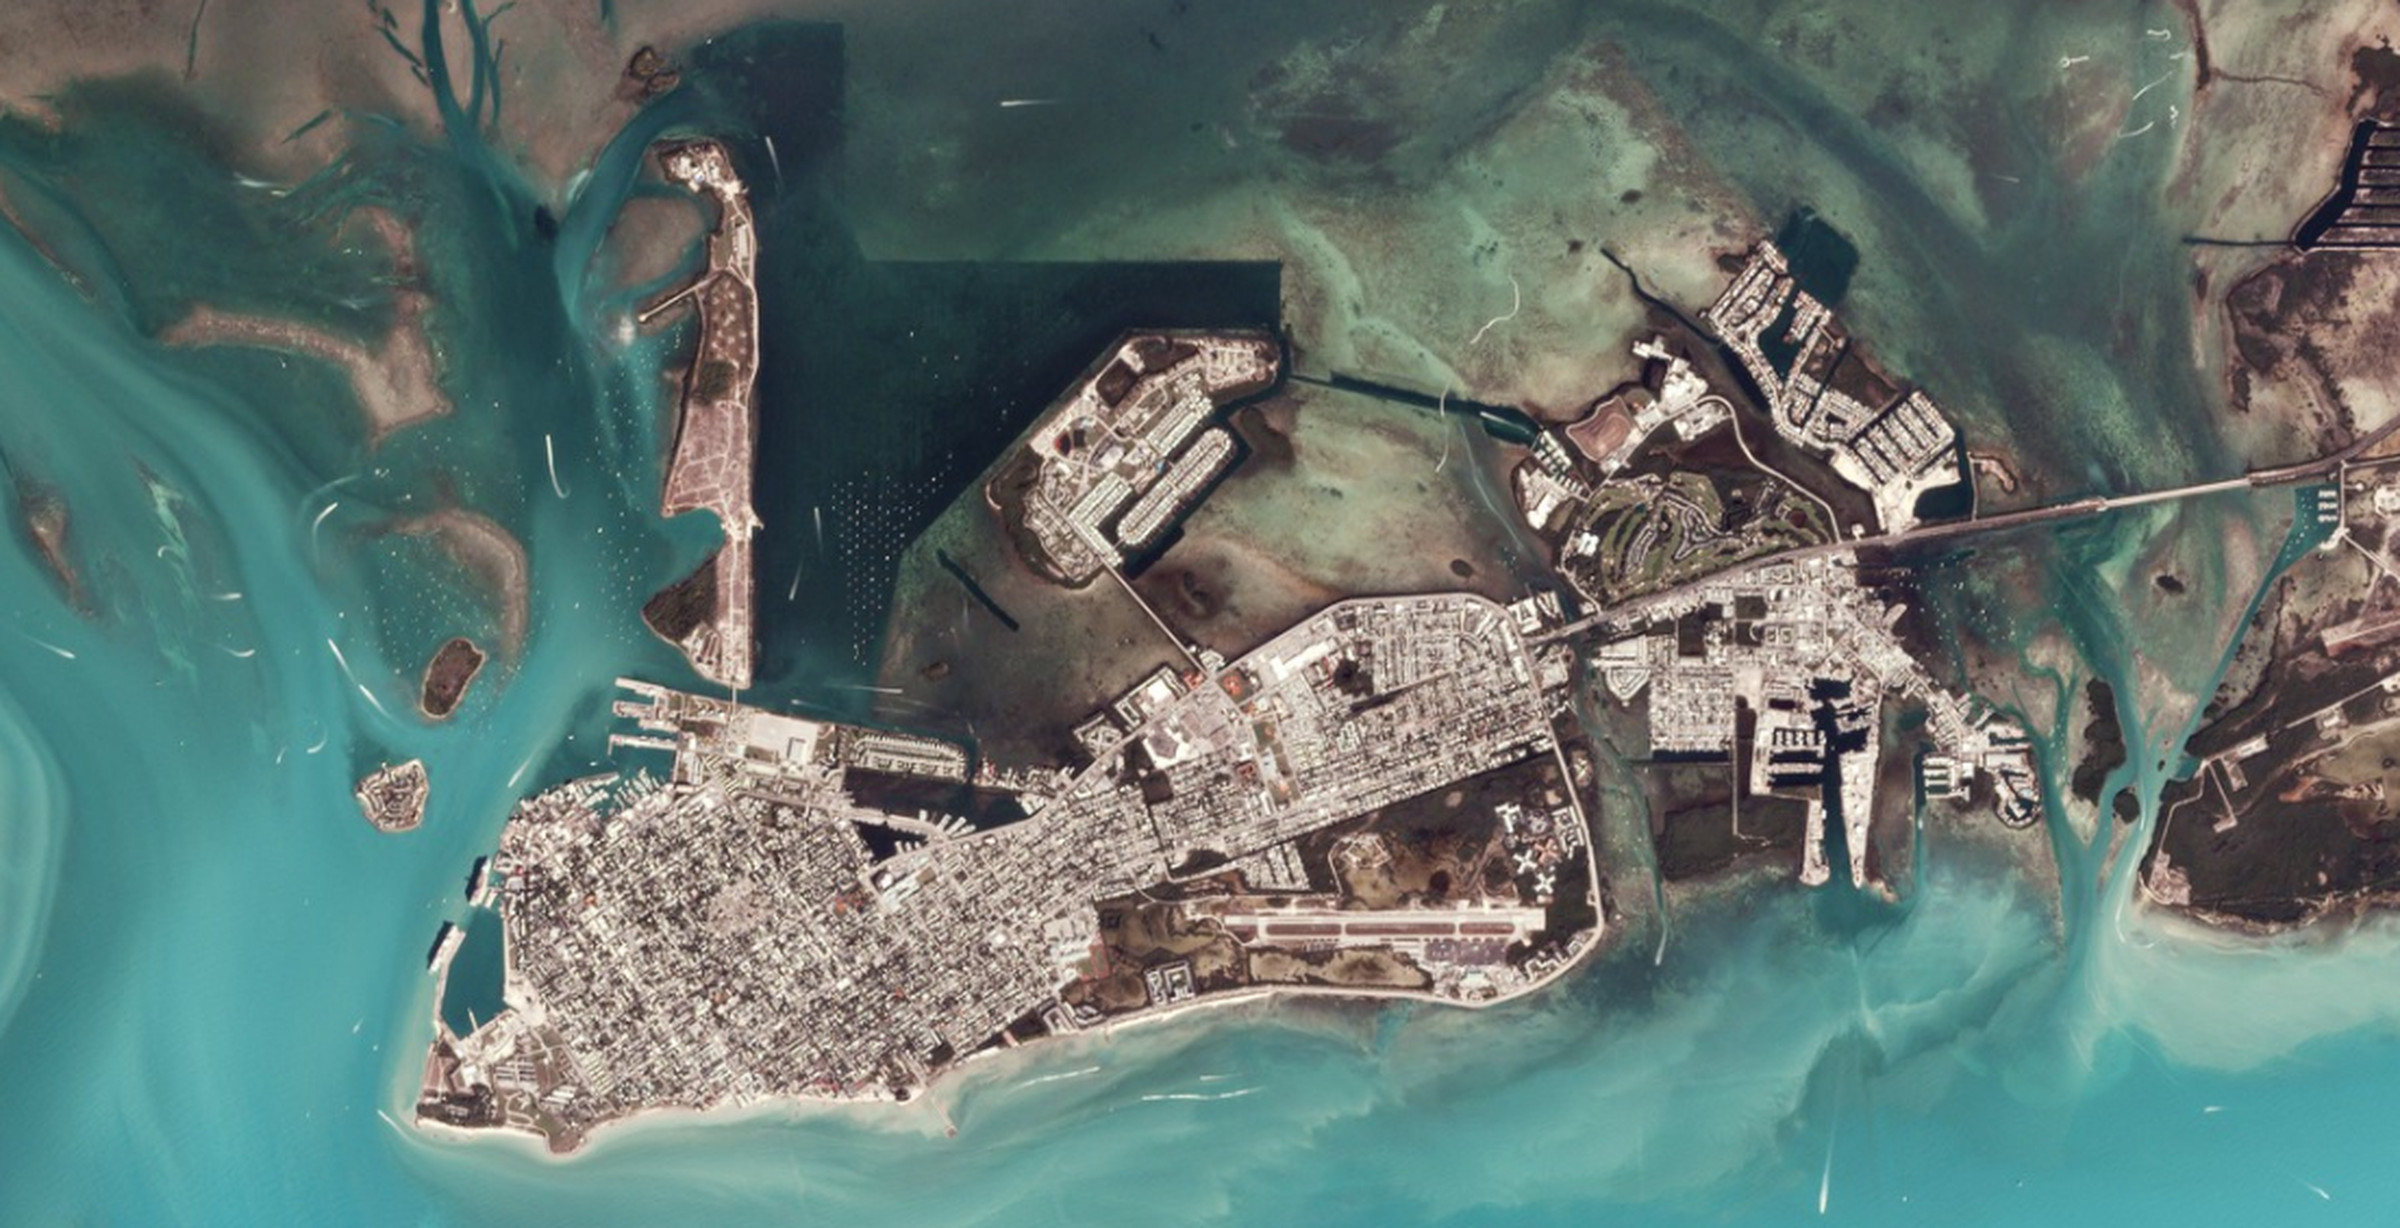 An image of Key West taken by one of Planet’s satellites.